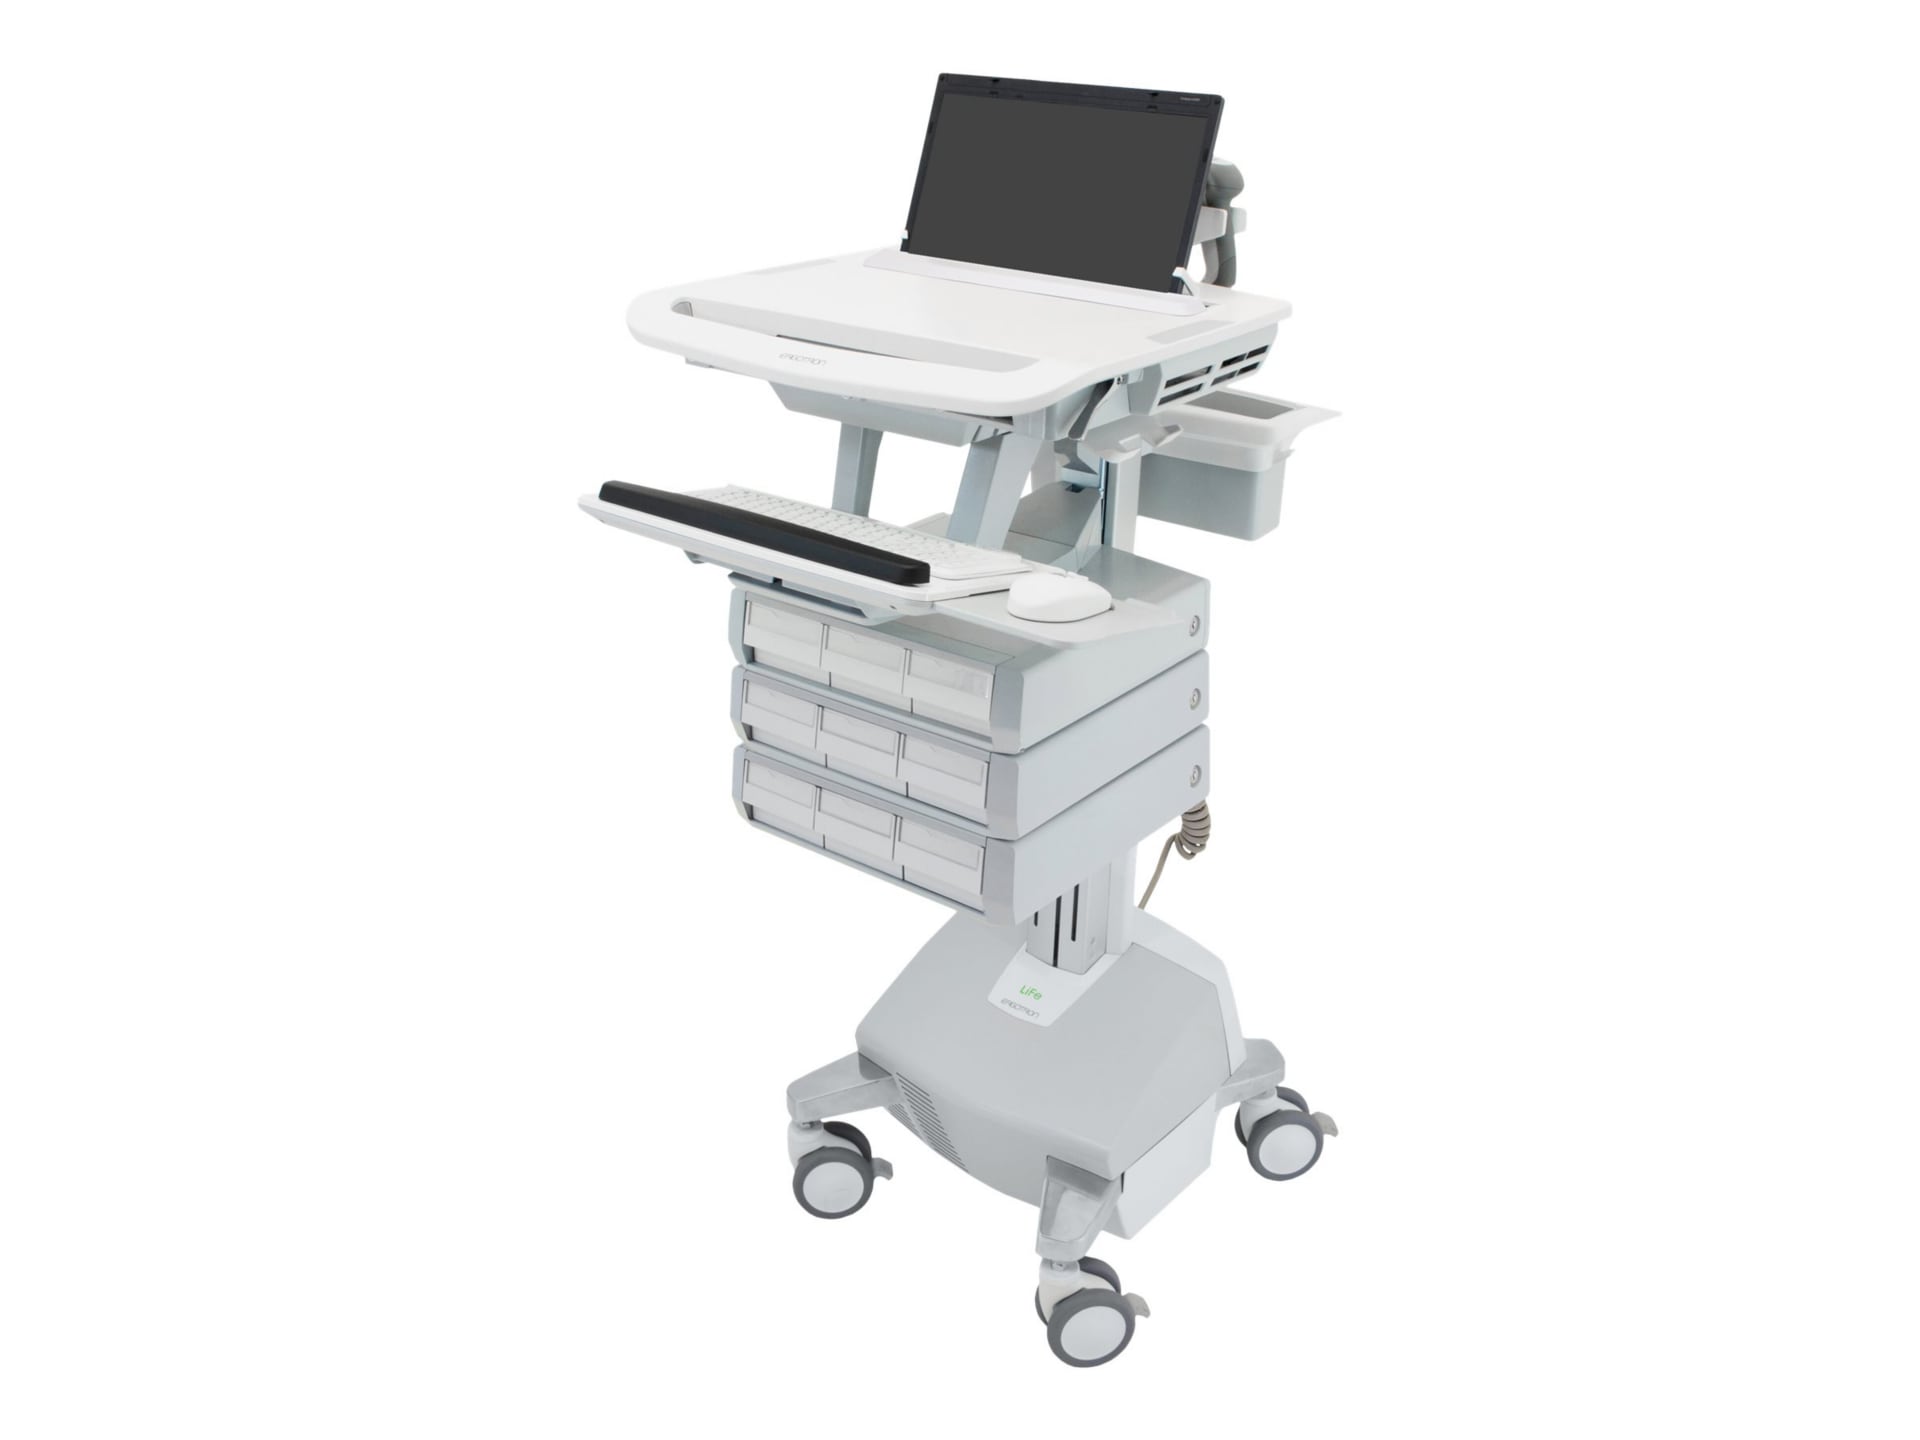 Ergotron StyleView - cart - open architecture - for notebook / keyboard / mouse - gray, white, polished aluminum - TAA